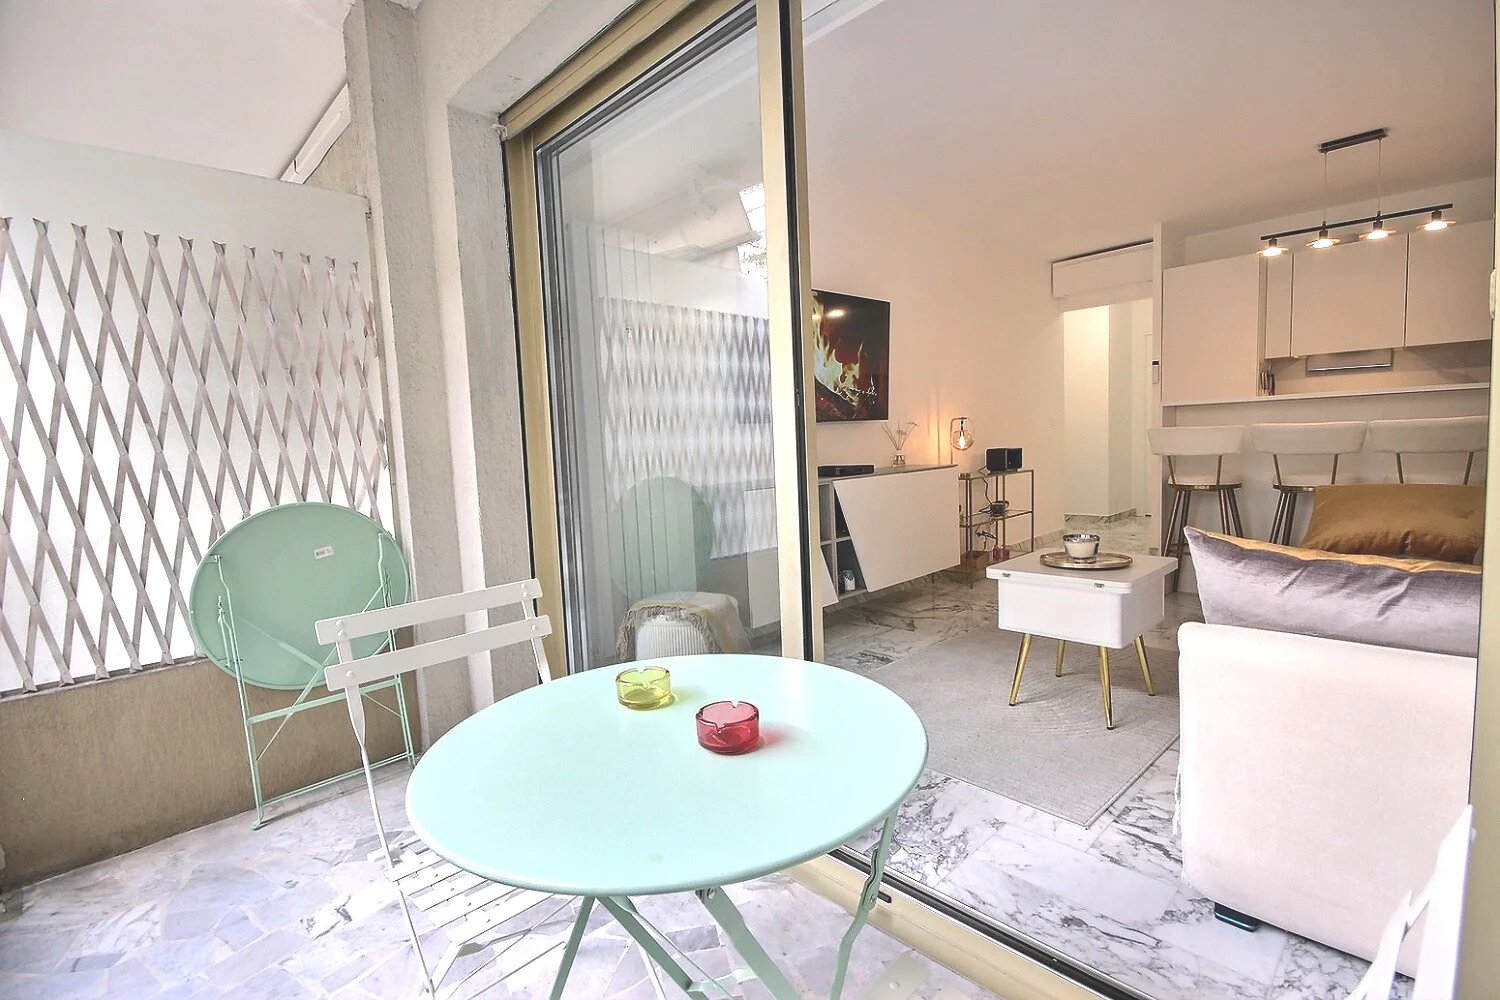 Cannes Banane investment property Situated in the heart of Cannes